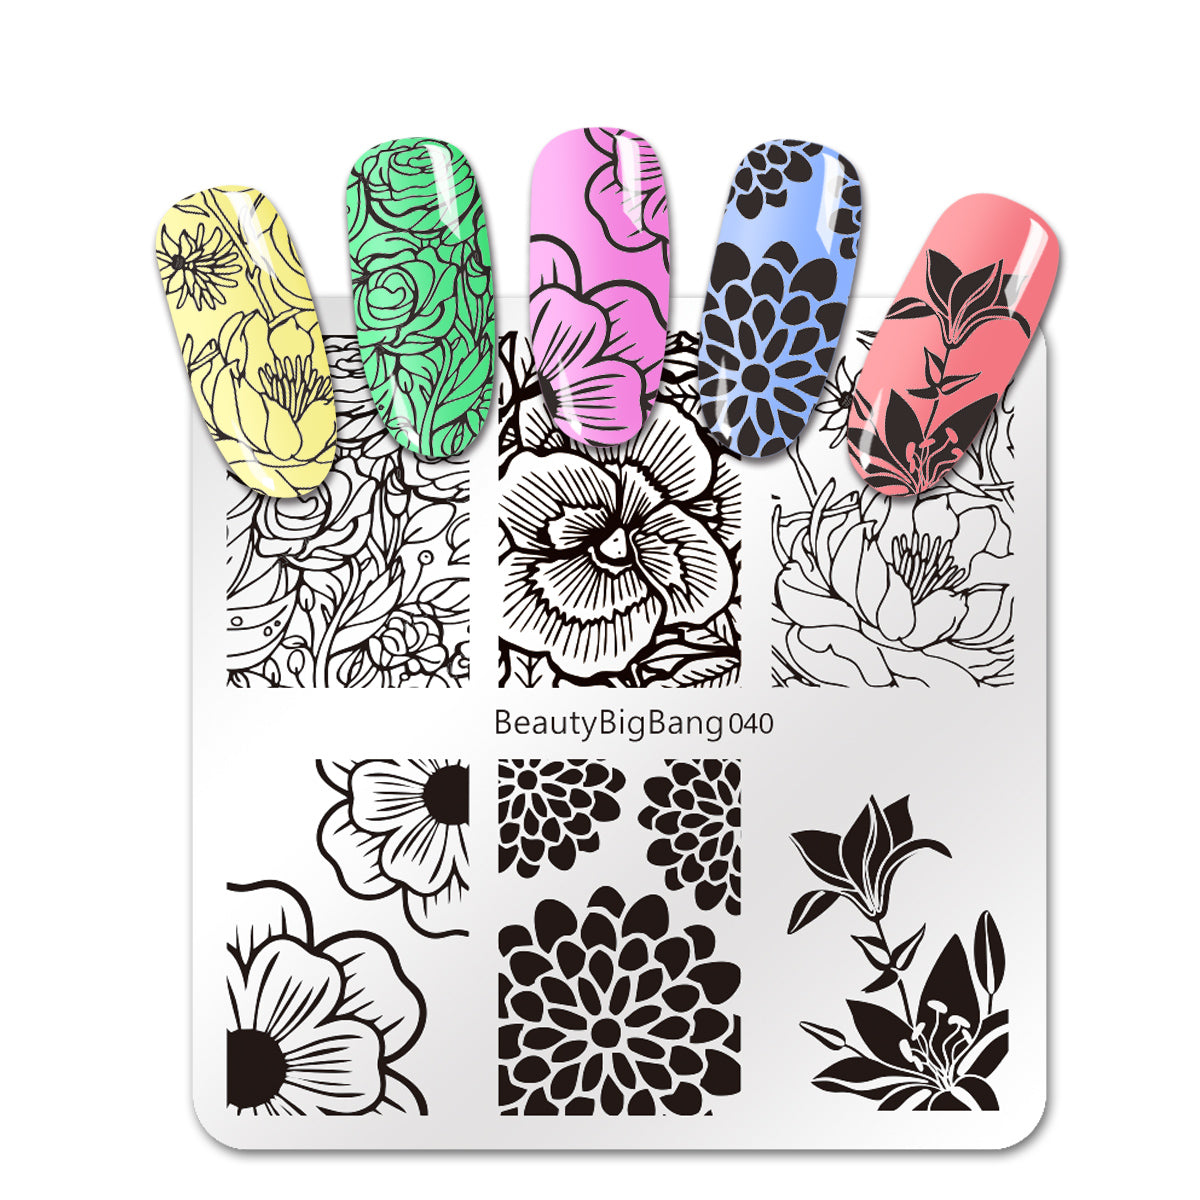 BeautyBigBang Cute Cats Nail Art Stamping Plates Stainless Steel